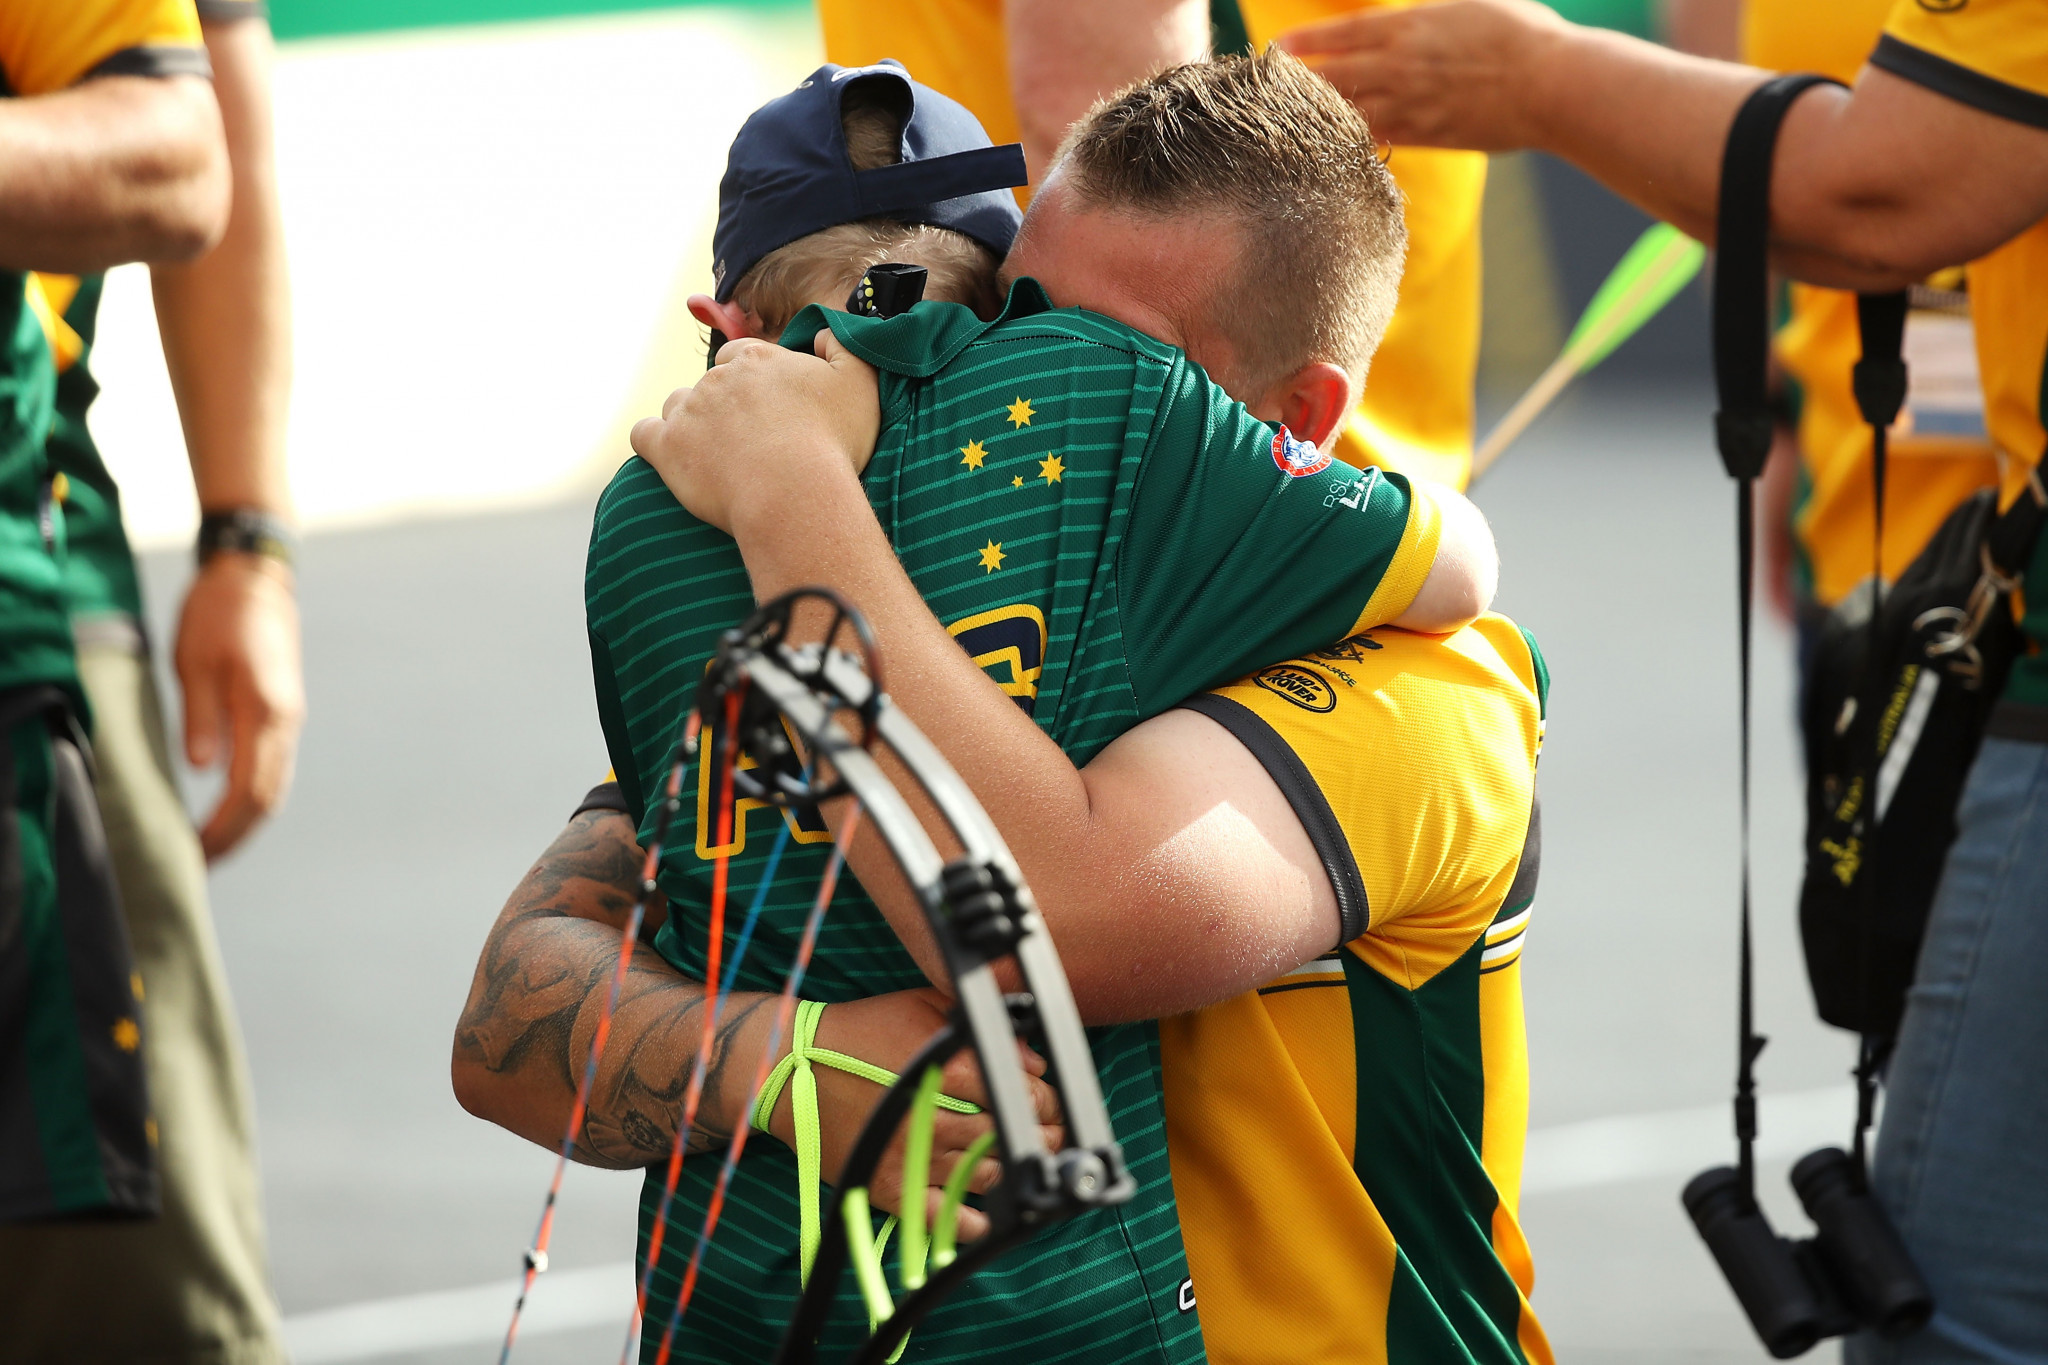 Archery titles were claimed on the penultimate day of the Invictus Games ©Getty Images